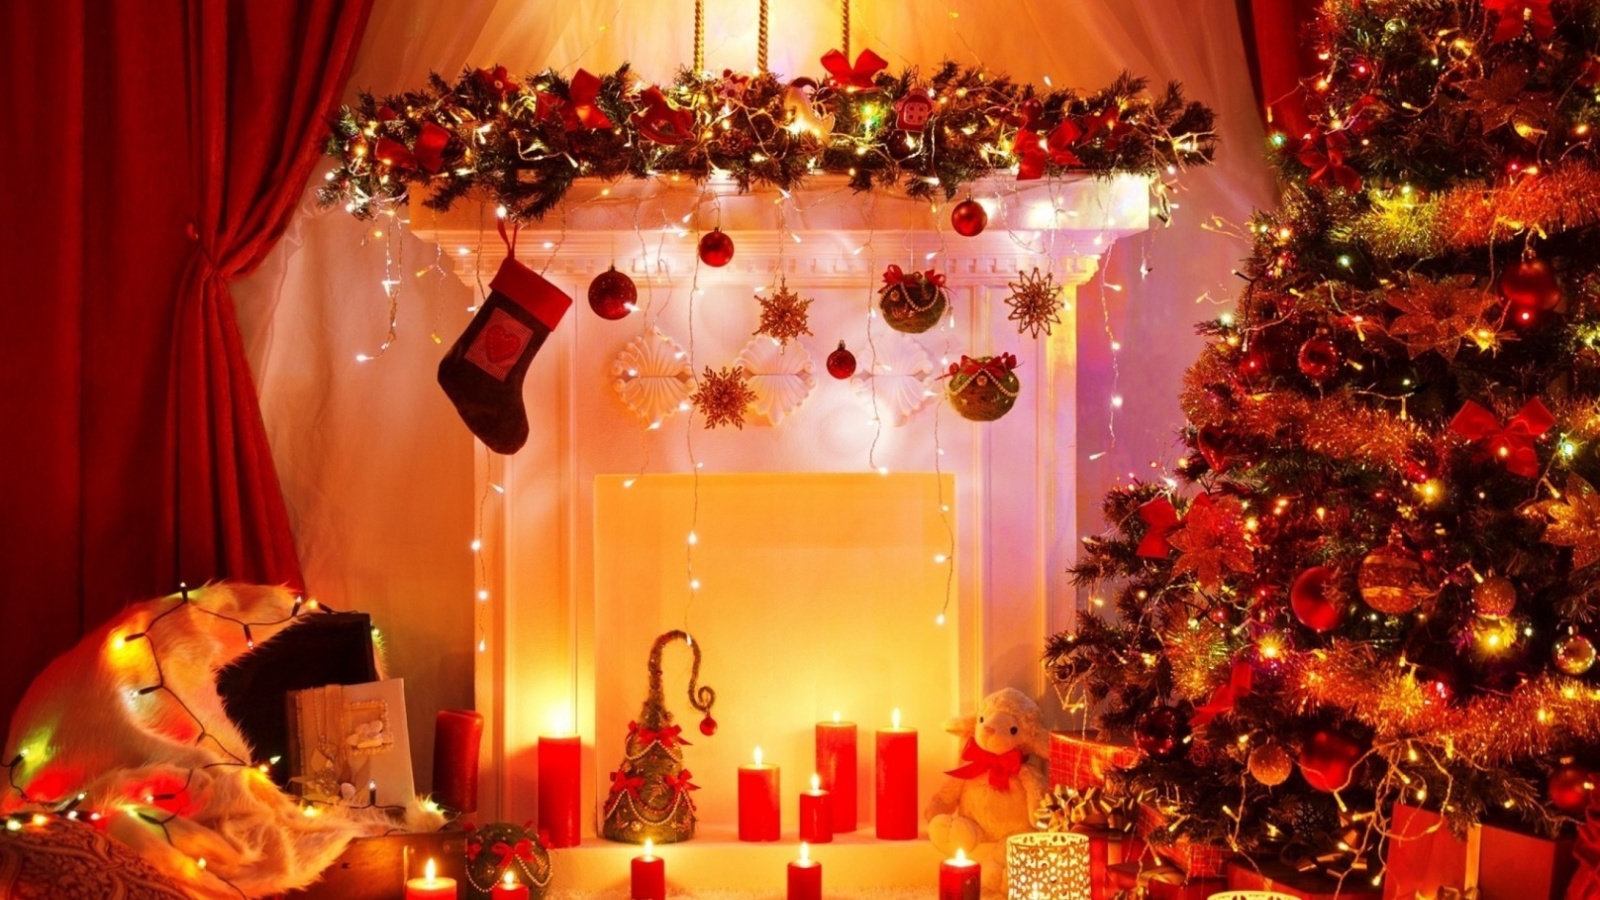 Home christmas decorations 2021 wallpaper 1600x900